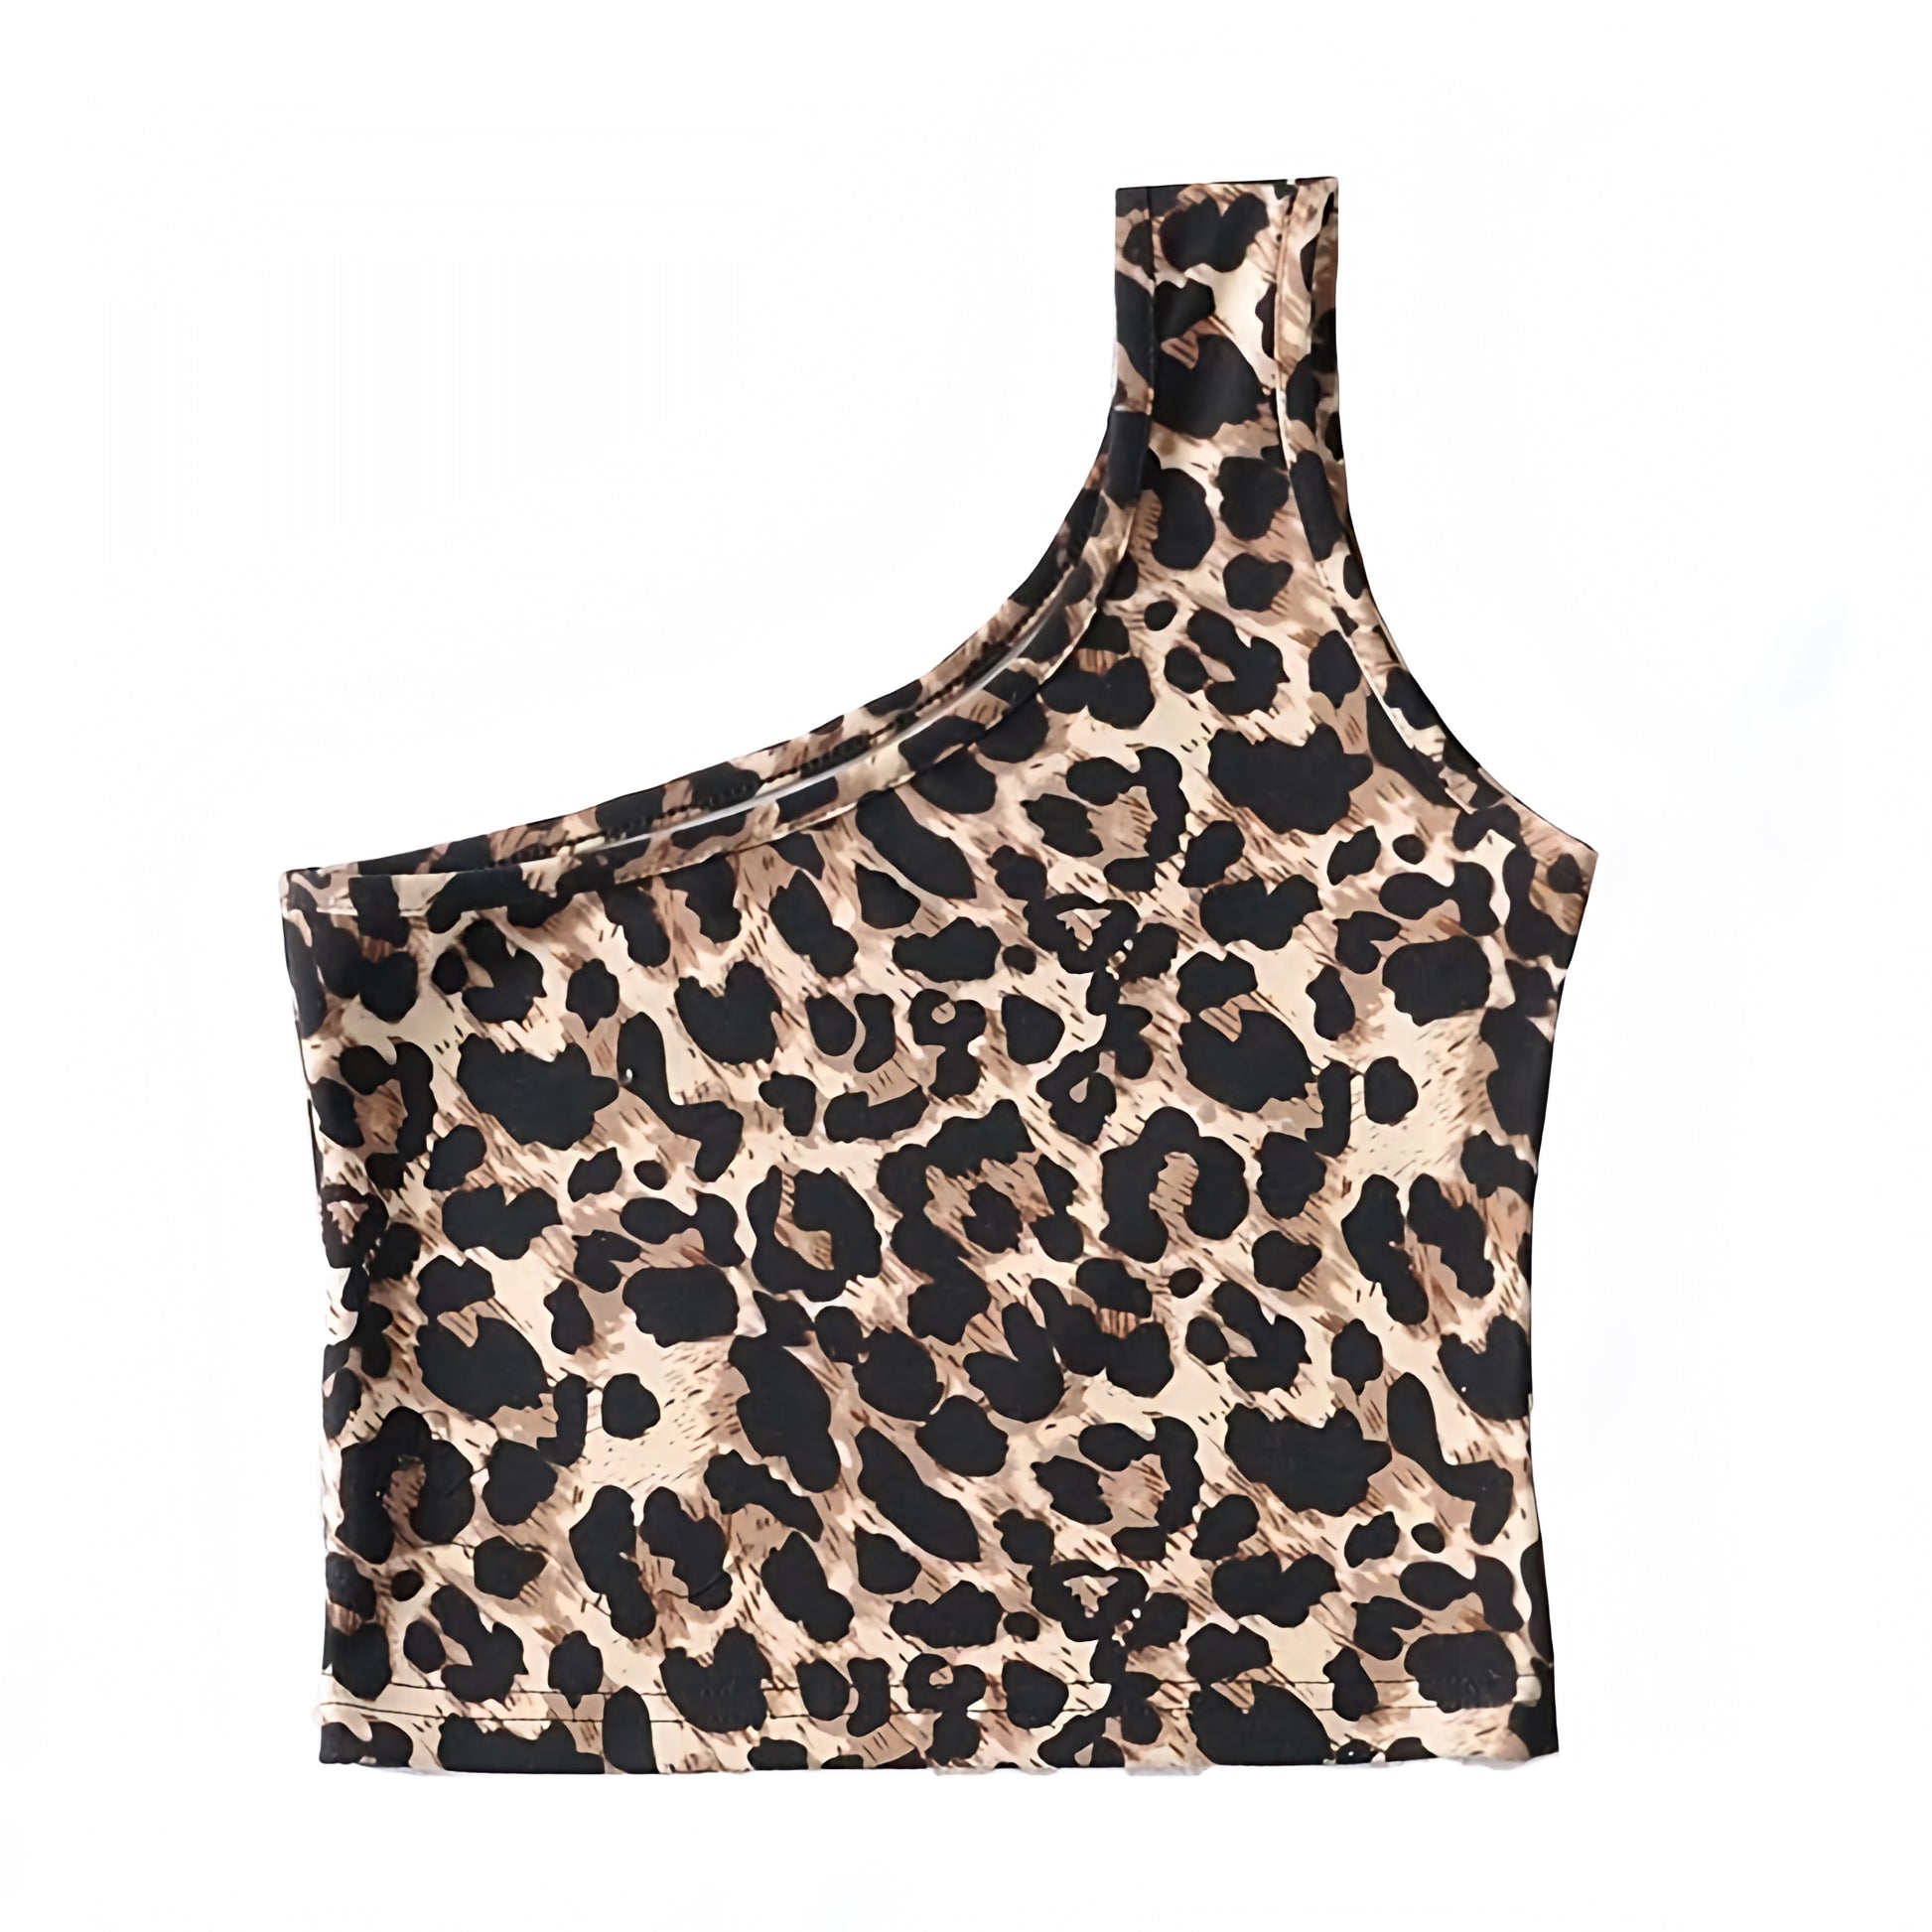 leopard-cheetah-animal-print-patterned-black-white-brown-multi-color-slim-fit-asymmetric-off-shoulder-sleeveless-short-sleeve-bandeau-crop-tank-top-blouse-women-ladies-chic-trendy-spring-2024-summer-casual-elegant-classy-y2k-party-club-wear-sexy-date-night-out-exotic-zara-revolve-white-fox-jaded-london-princess-polly-edikted